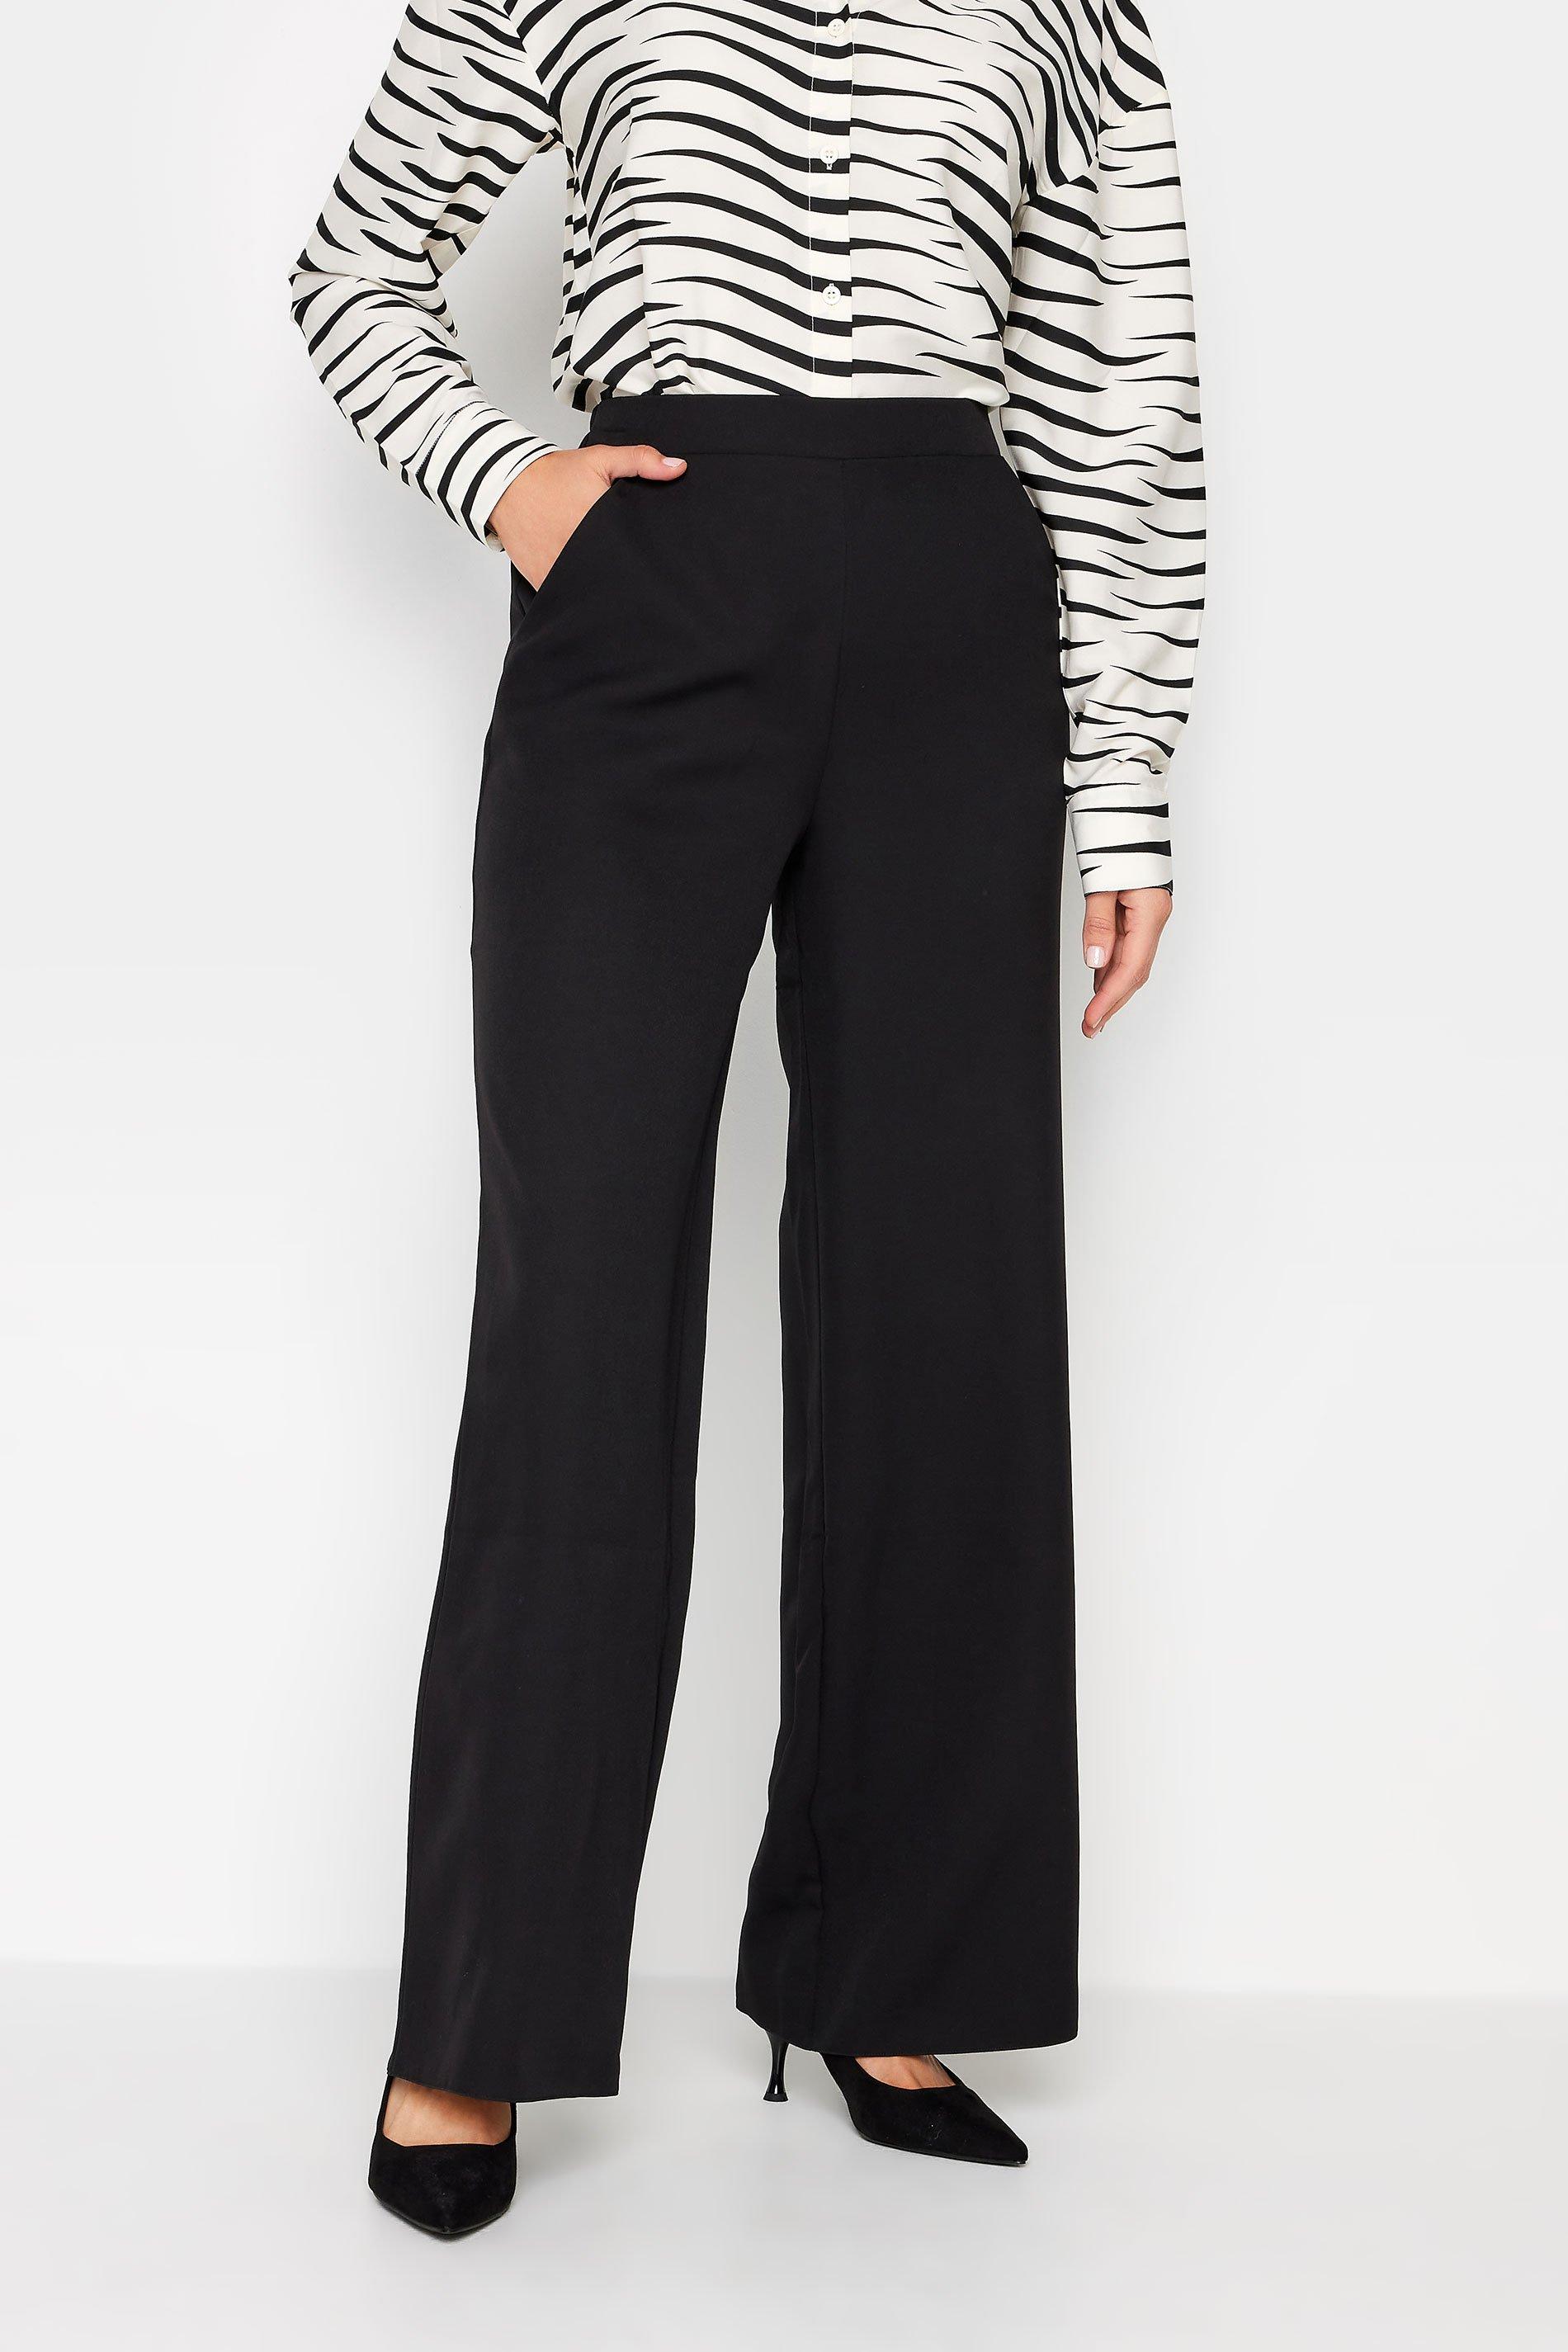 Buy Women's Tall High Waisted Trousers Online | Next UK